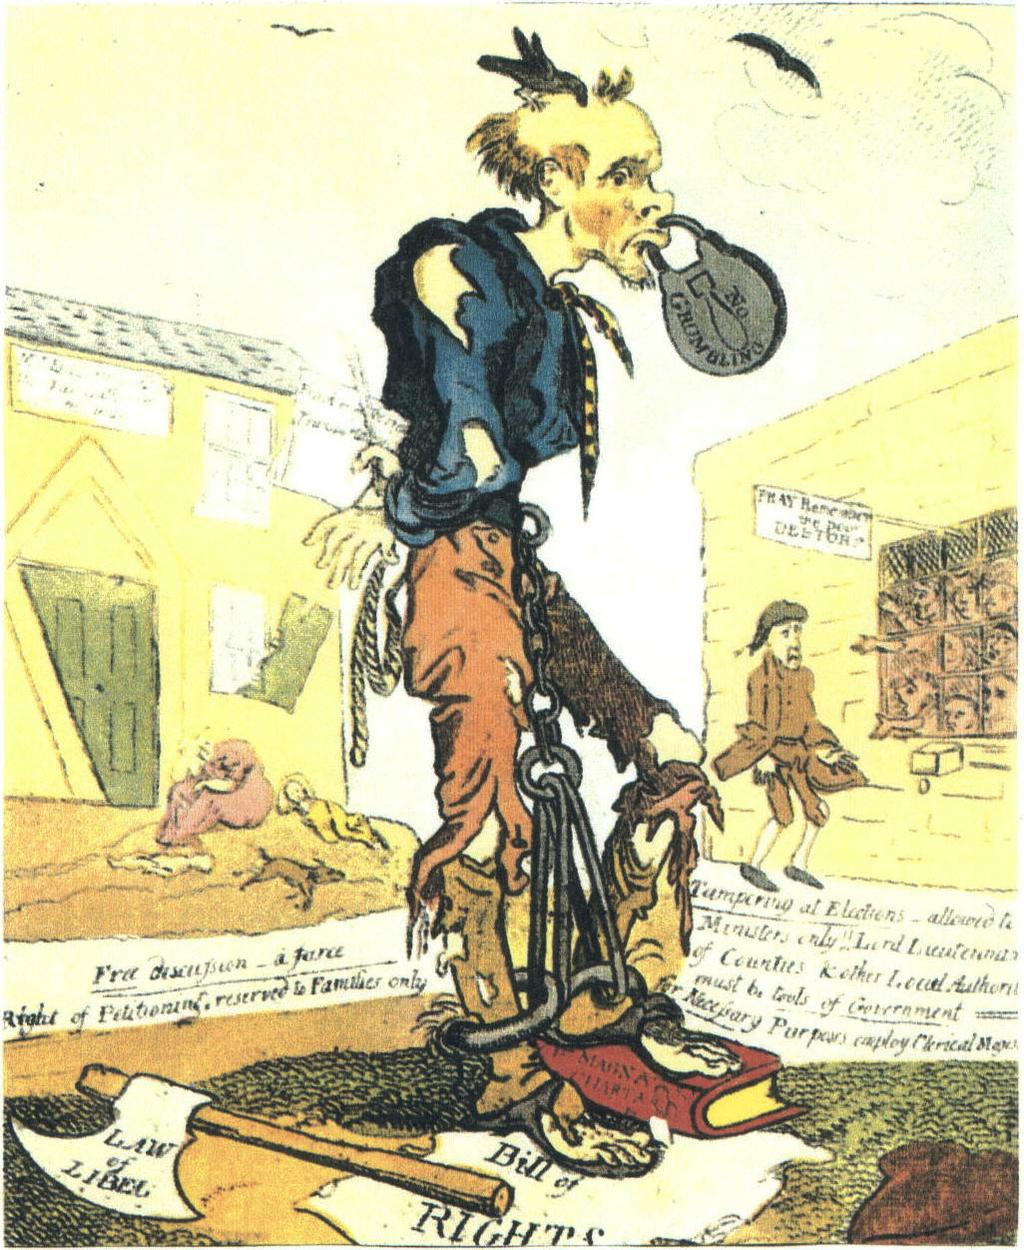 The caption on the lower left side of this illustration states, The noble is the spider, the peasant the fly.